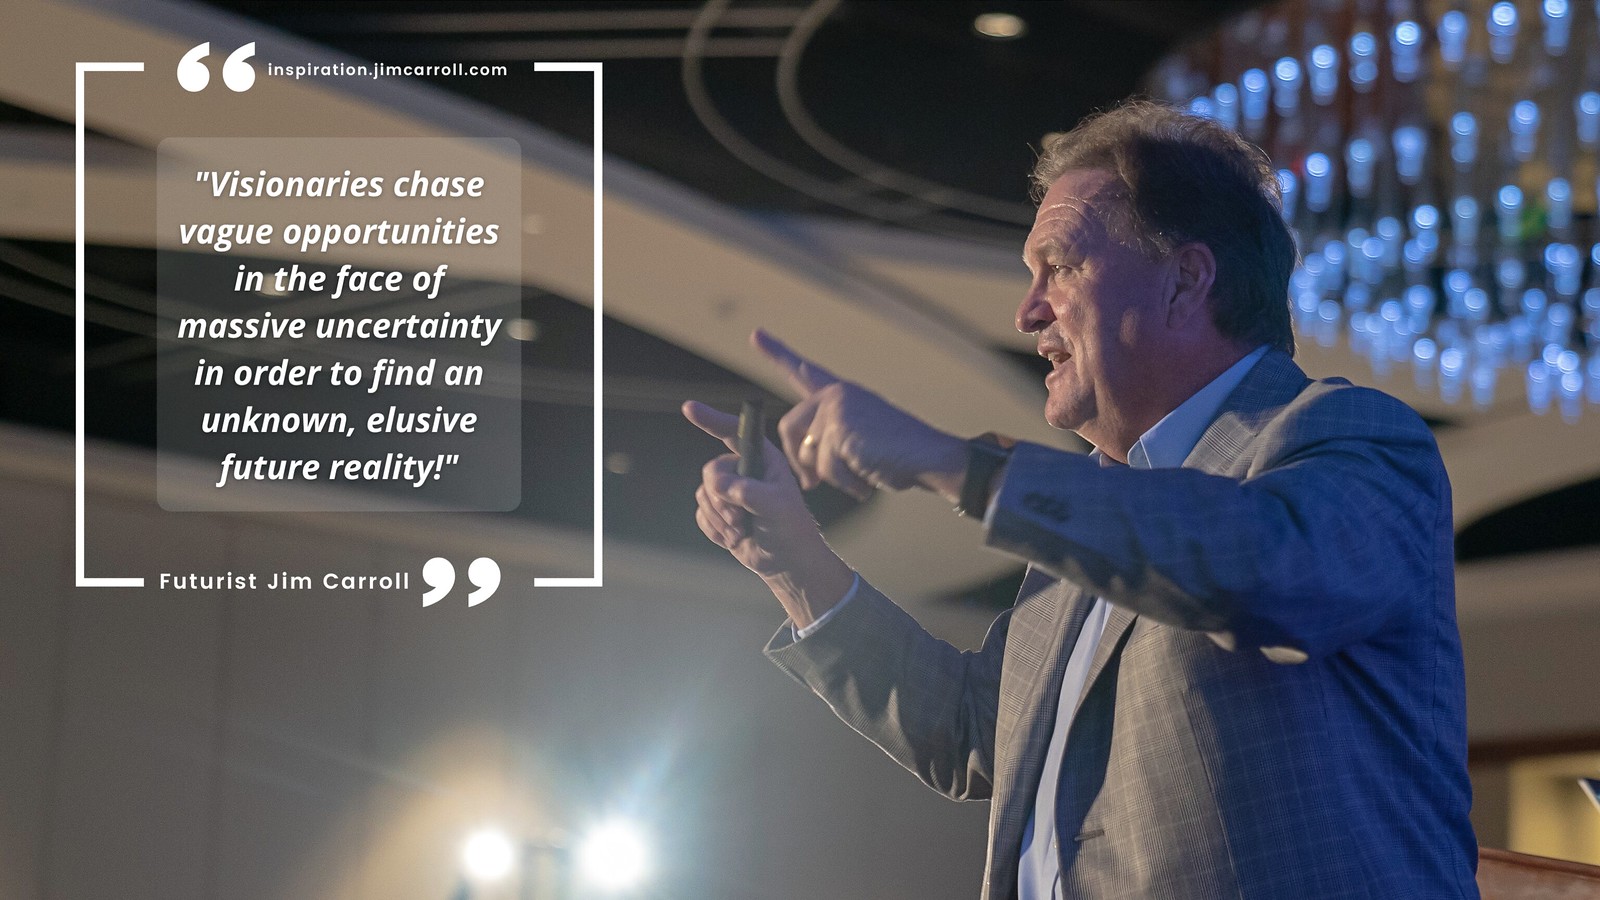 "Visionaries chase vague opportunities in the face of massive uncertainty in order to find an unknown, elusive future reality!" - Futurist Jim Carroll